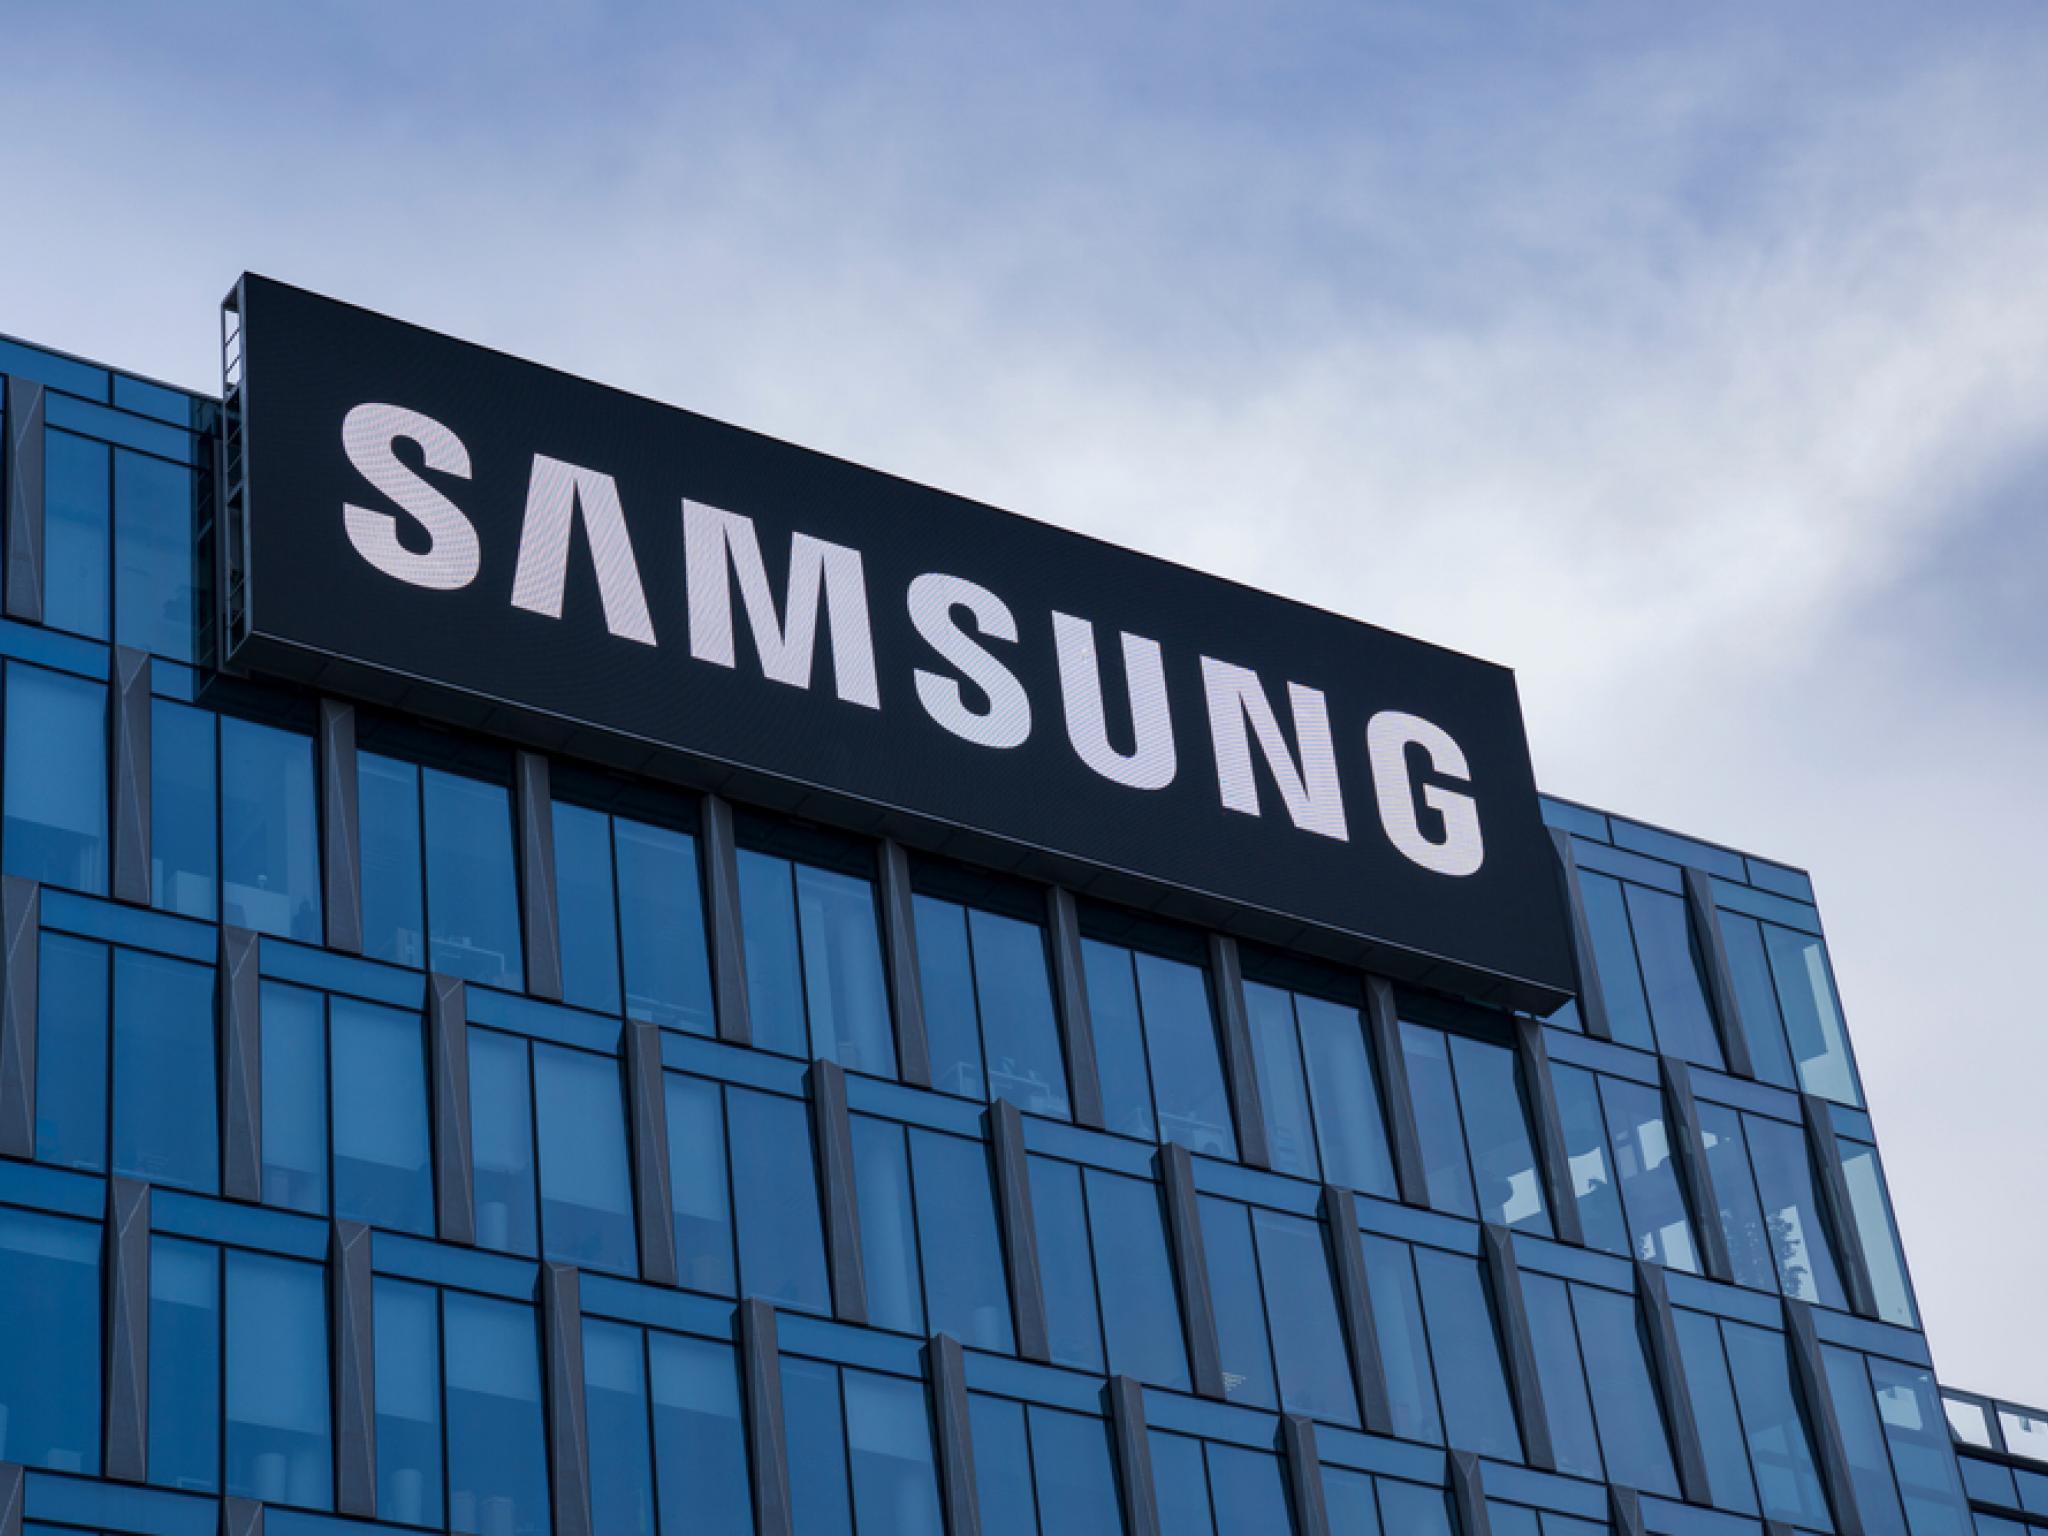  samsung-goes-big-in-america-44b-chip-plant-reportedly-planned-in-texas 